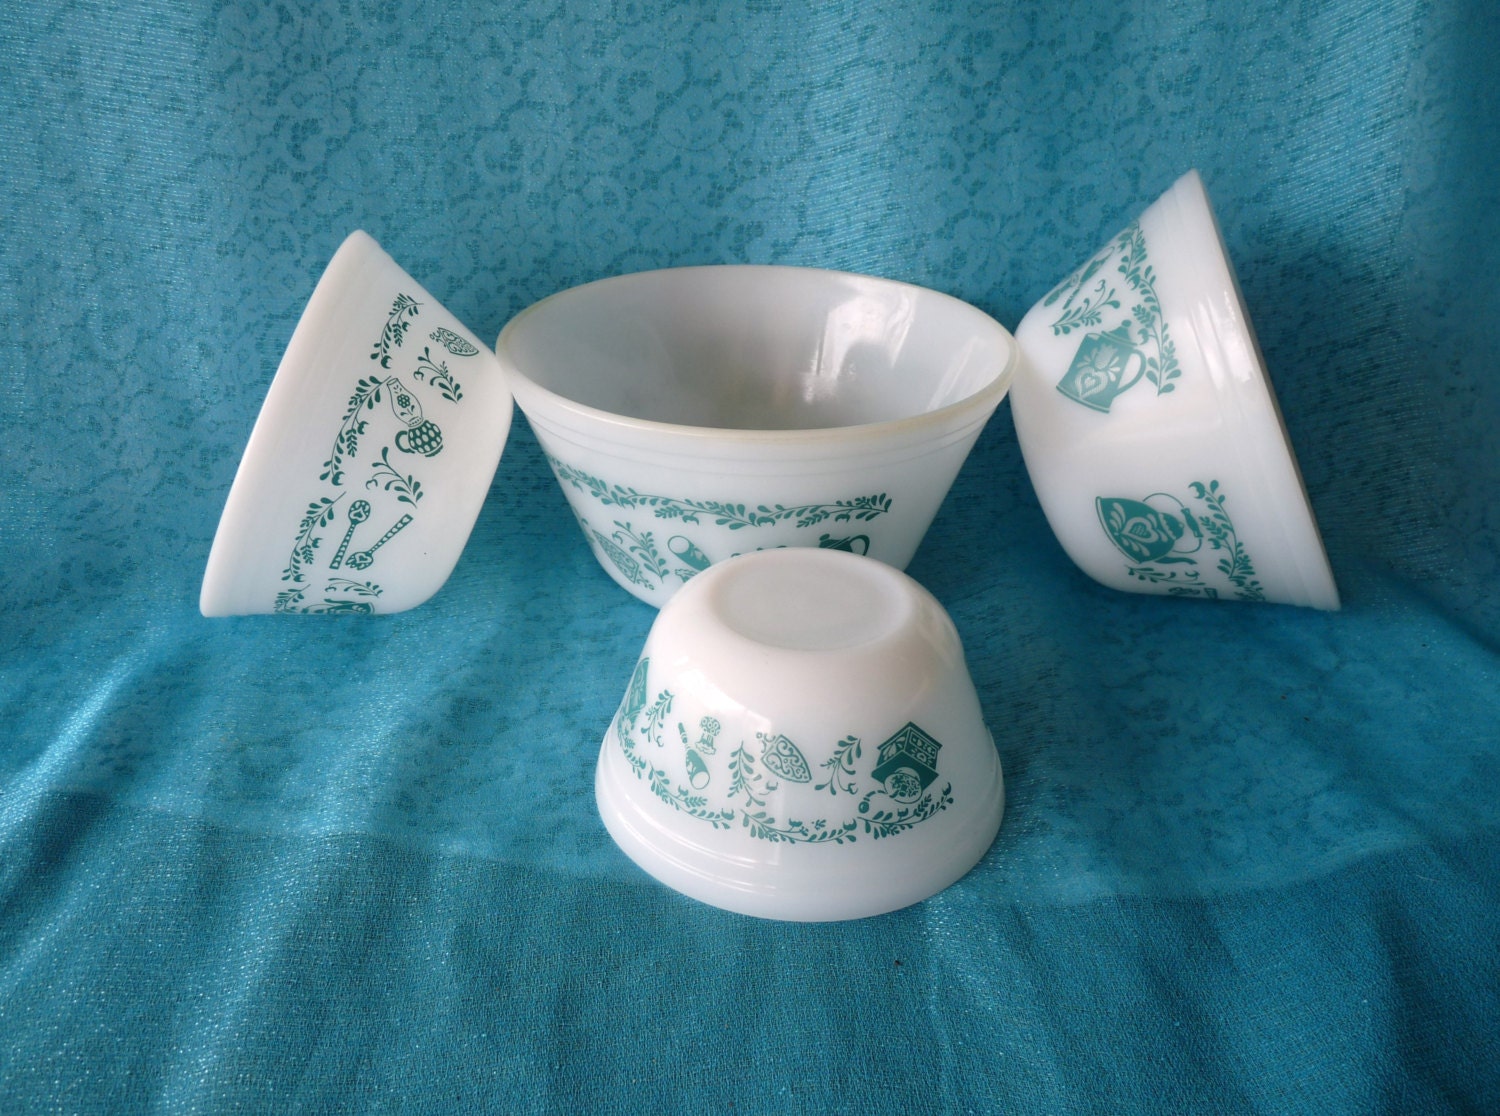 Federal Oven Ware Milk Glass Nesting Mixing Bowls - Set of 4